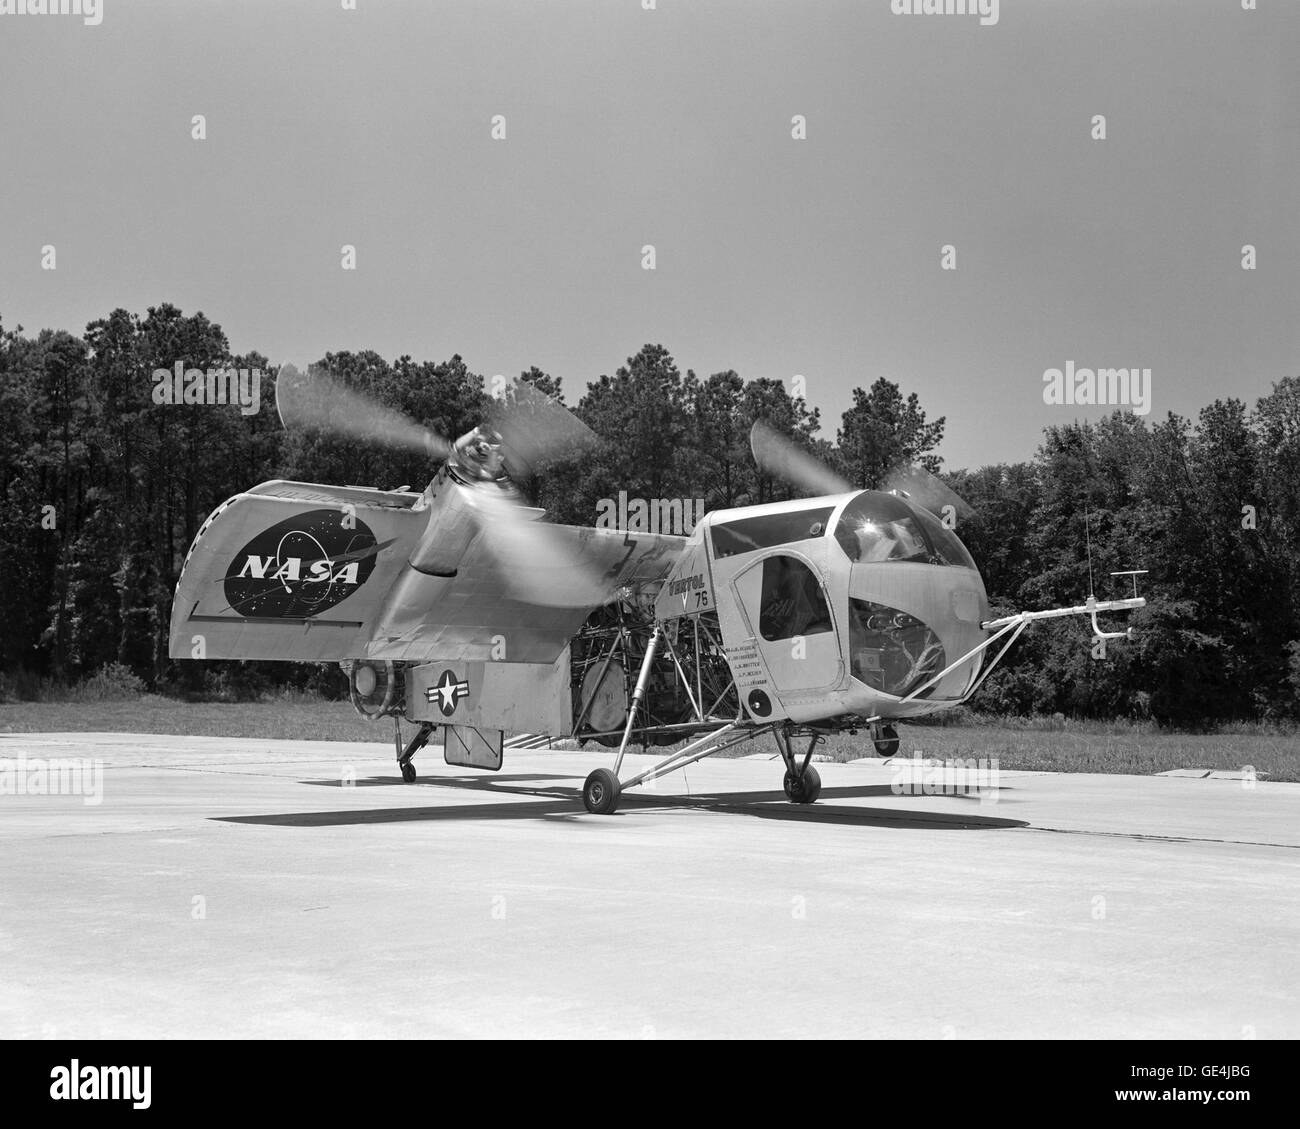 Arriving at Langley from Edwards Air Force Base, Califorina in 1960, this Vertol VZ-2 (Model 76) underwent almost a year and a half of flight research before going back to the manufacturer for rework. The VZ-2 was used to investigate Vertical Take-Off and Landing (VTOL). (Image # L-1960-04109) Stock Photo